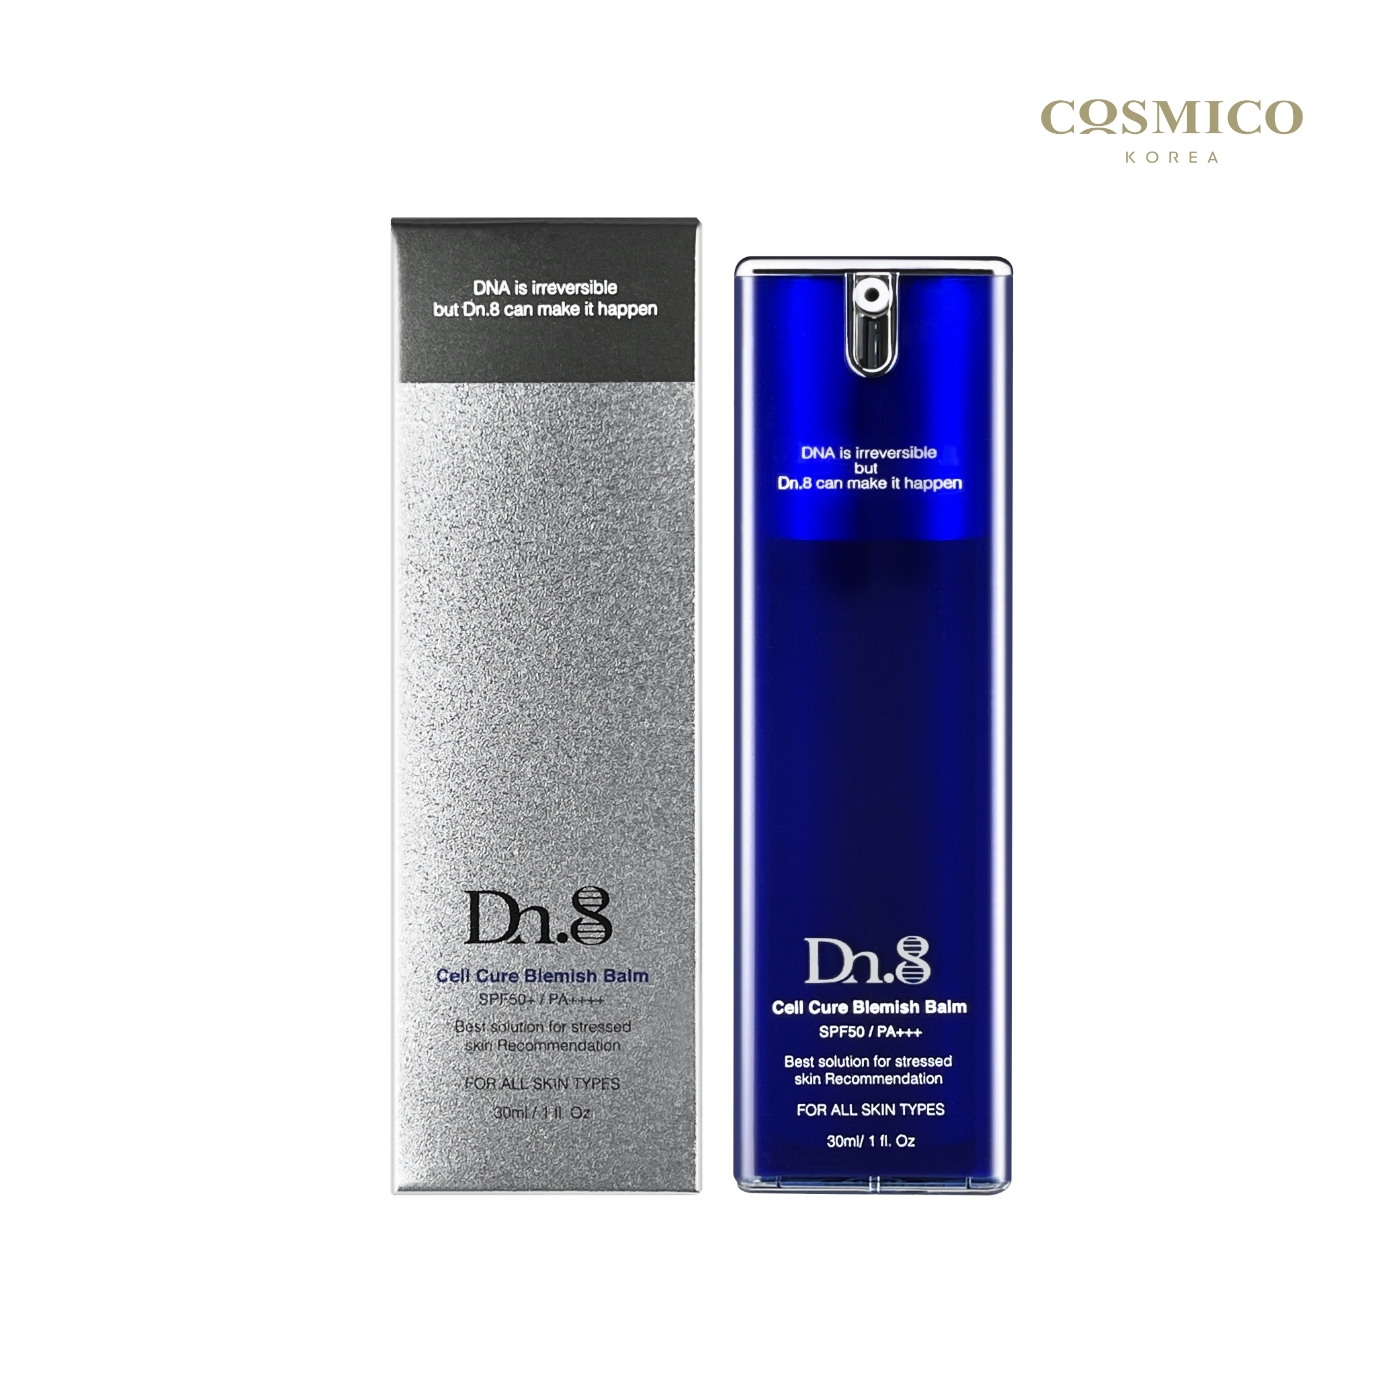 _skincare_ Dn_8 Cell Cure Blemish Balm